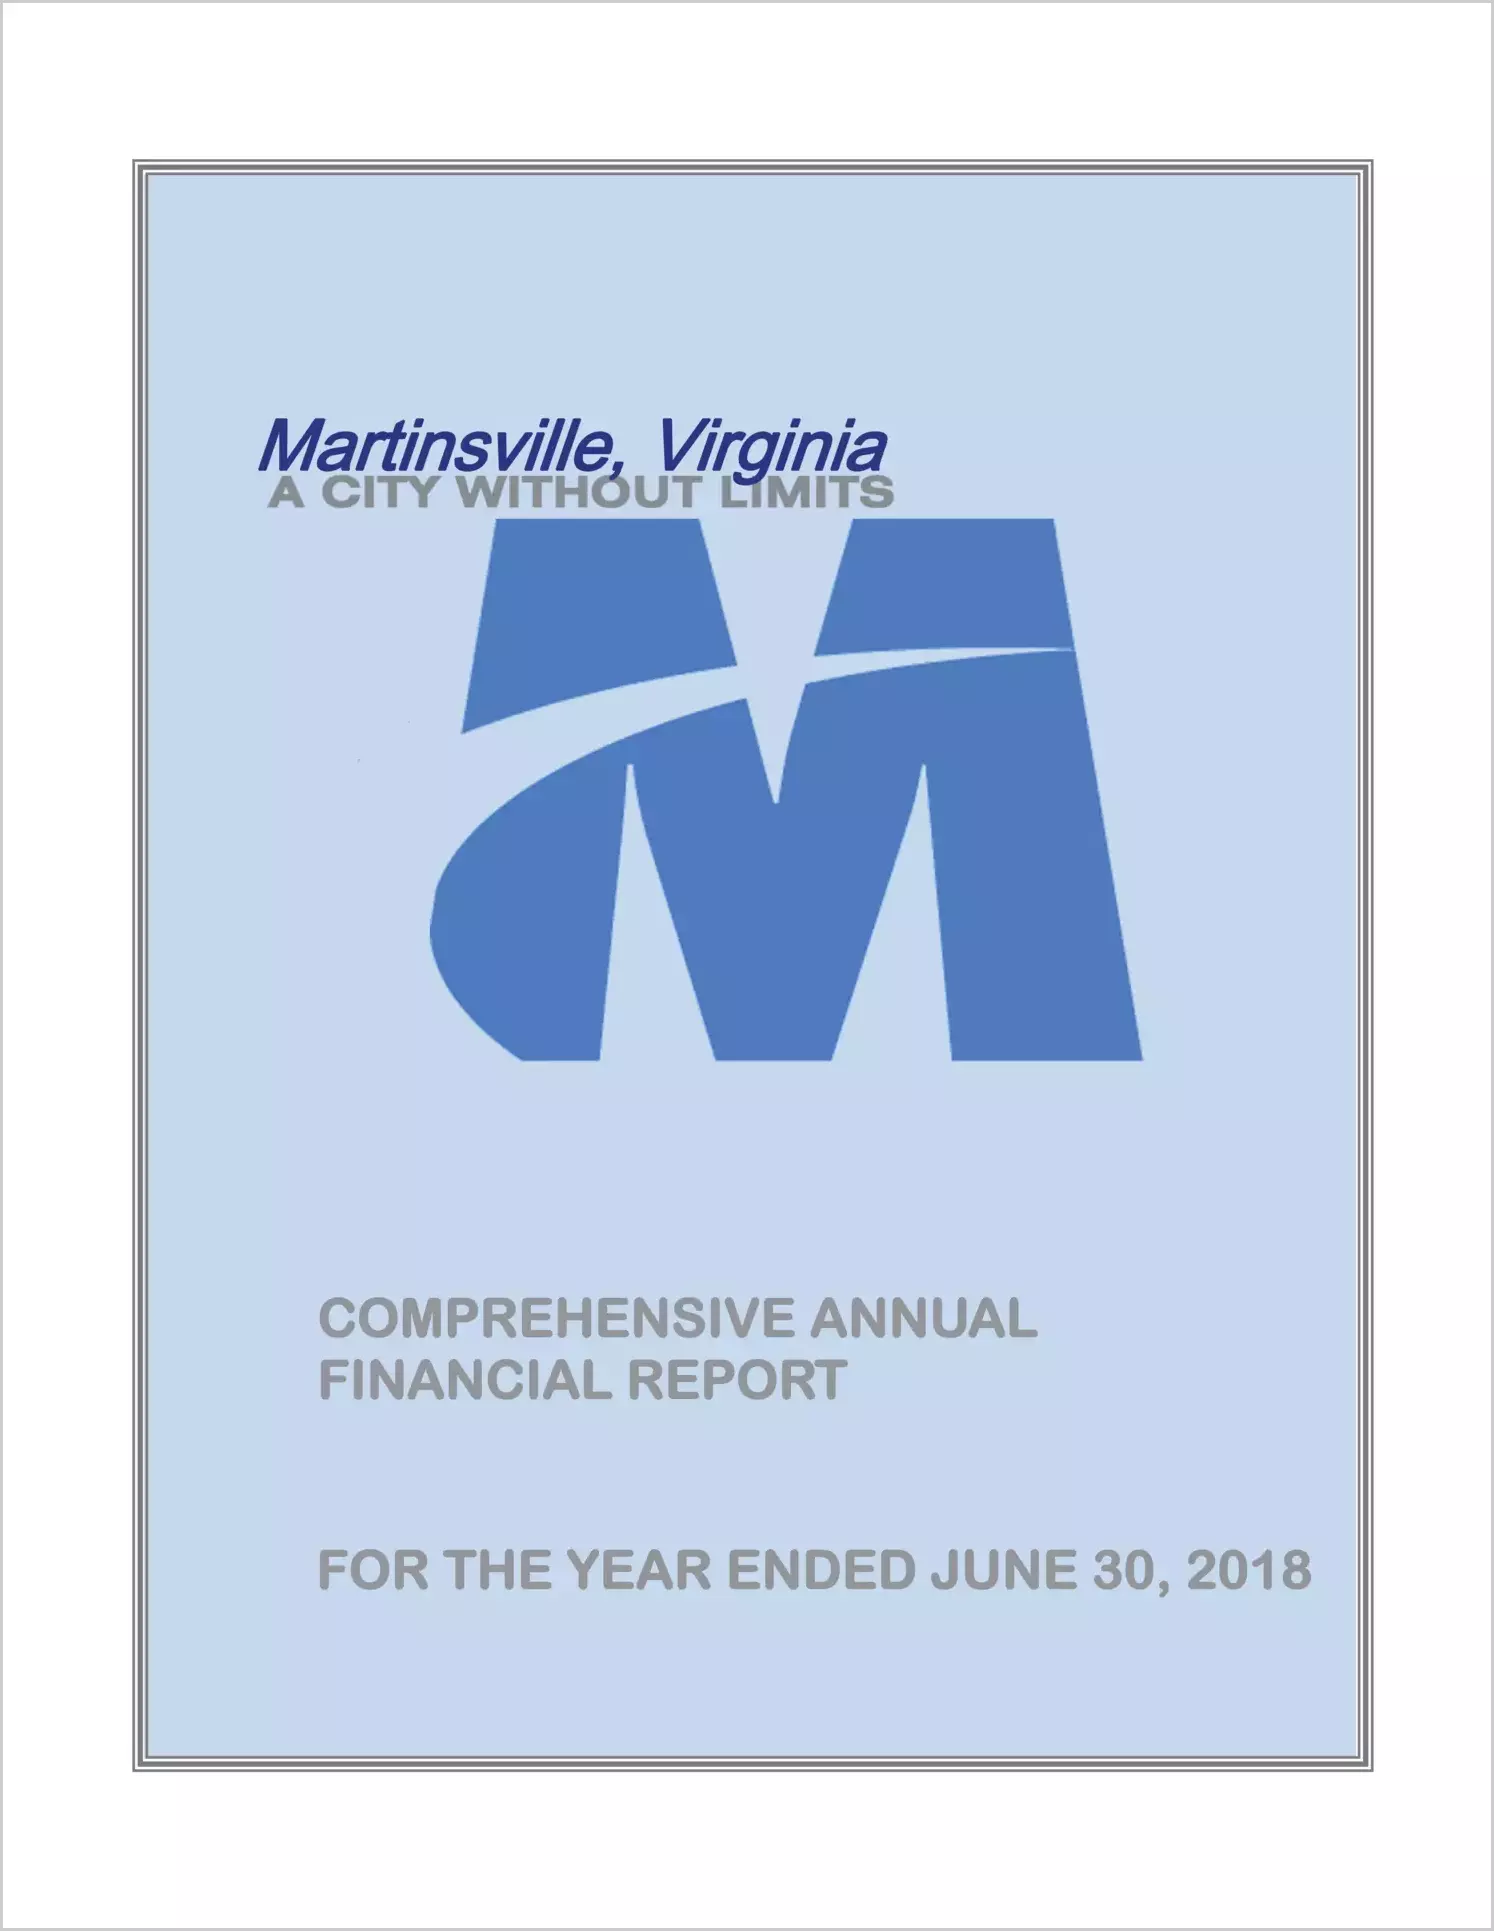 2018 Annual Financial Report for City of Martinsville